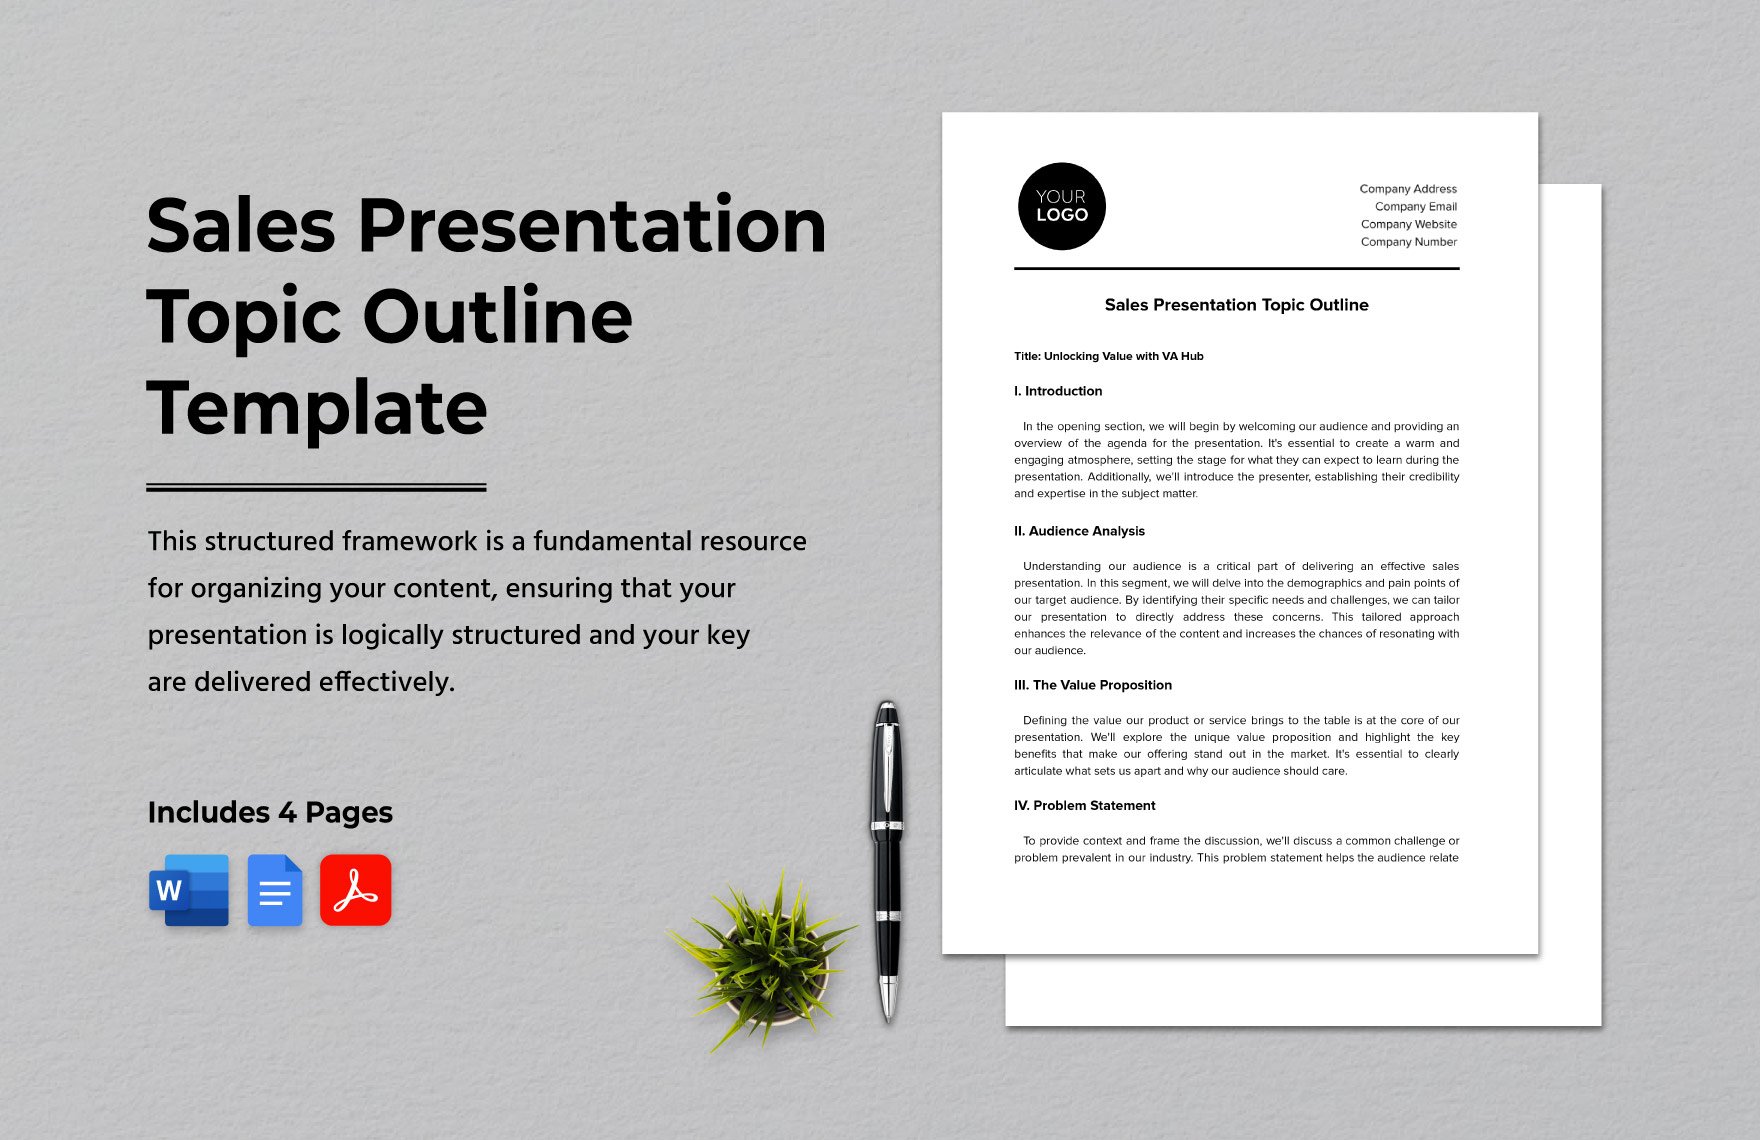 Sales Presentation Topic Outline Template in Word, Google Docs, PDF